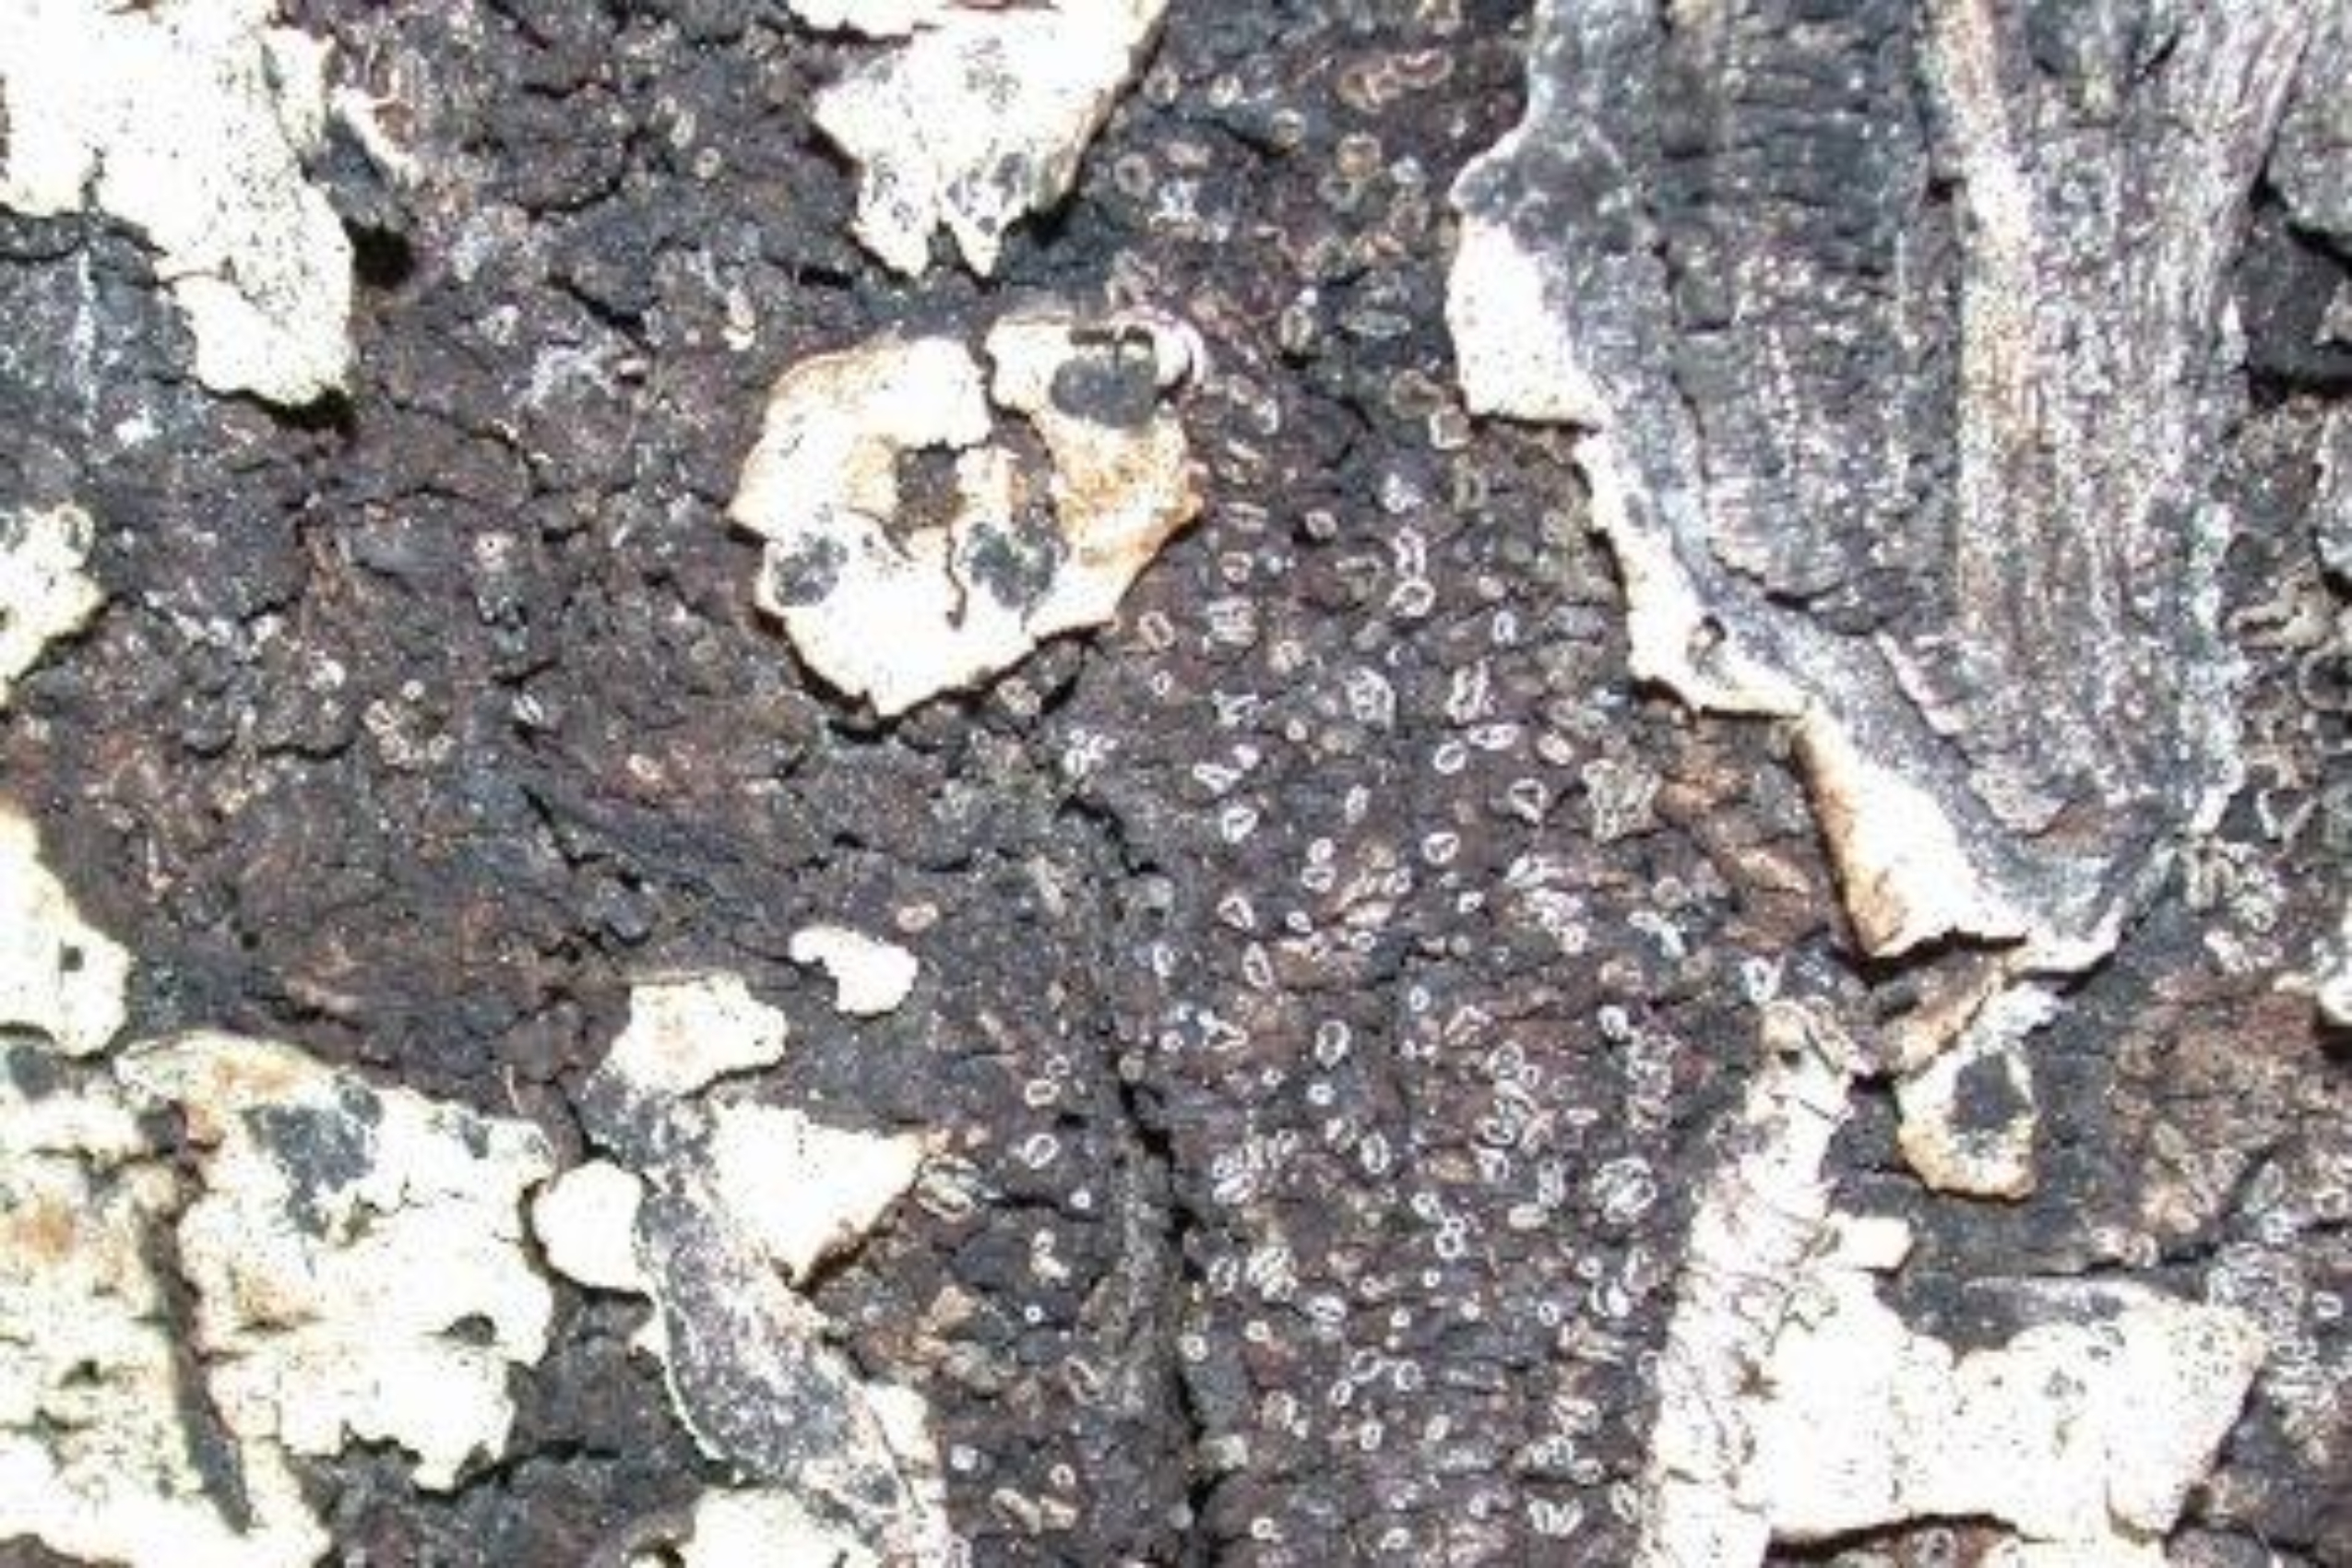 Closeup of bark on tree trunk damaged by canker.